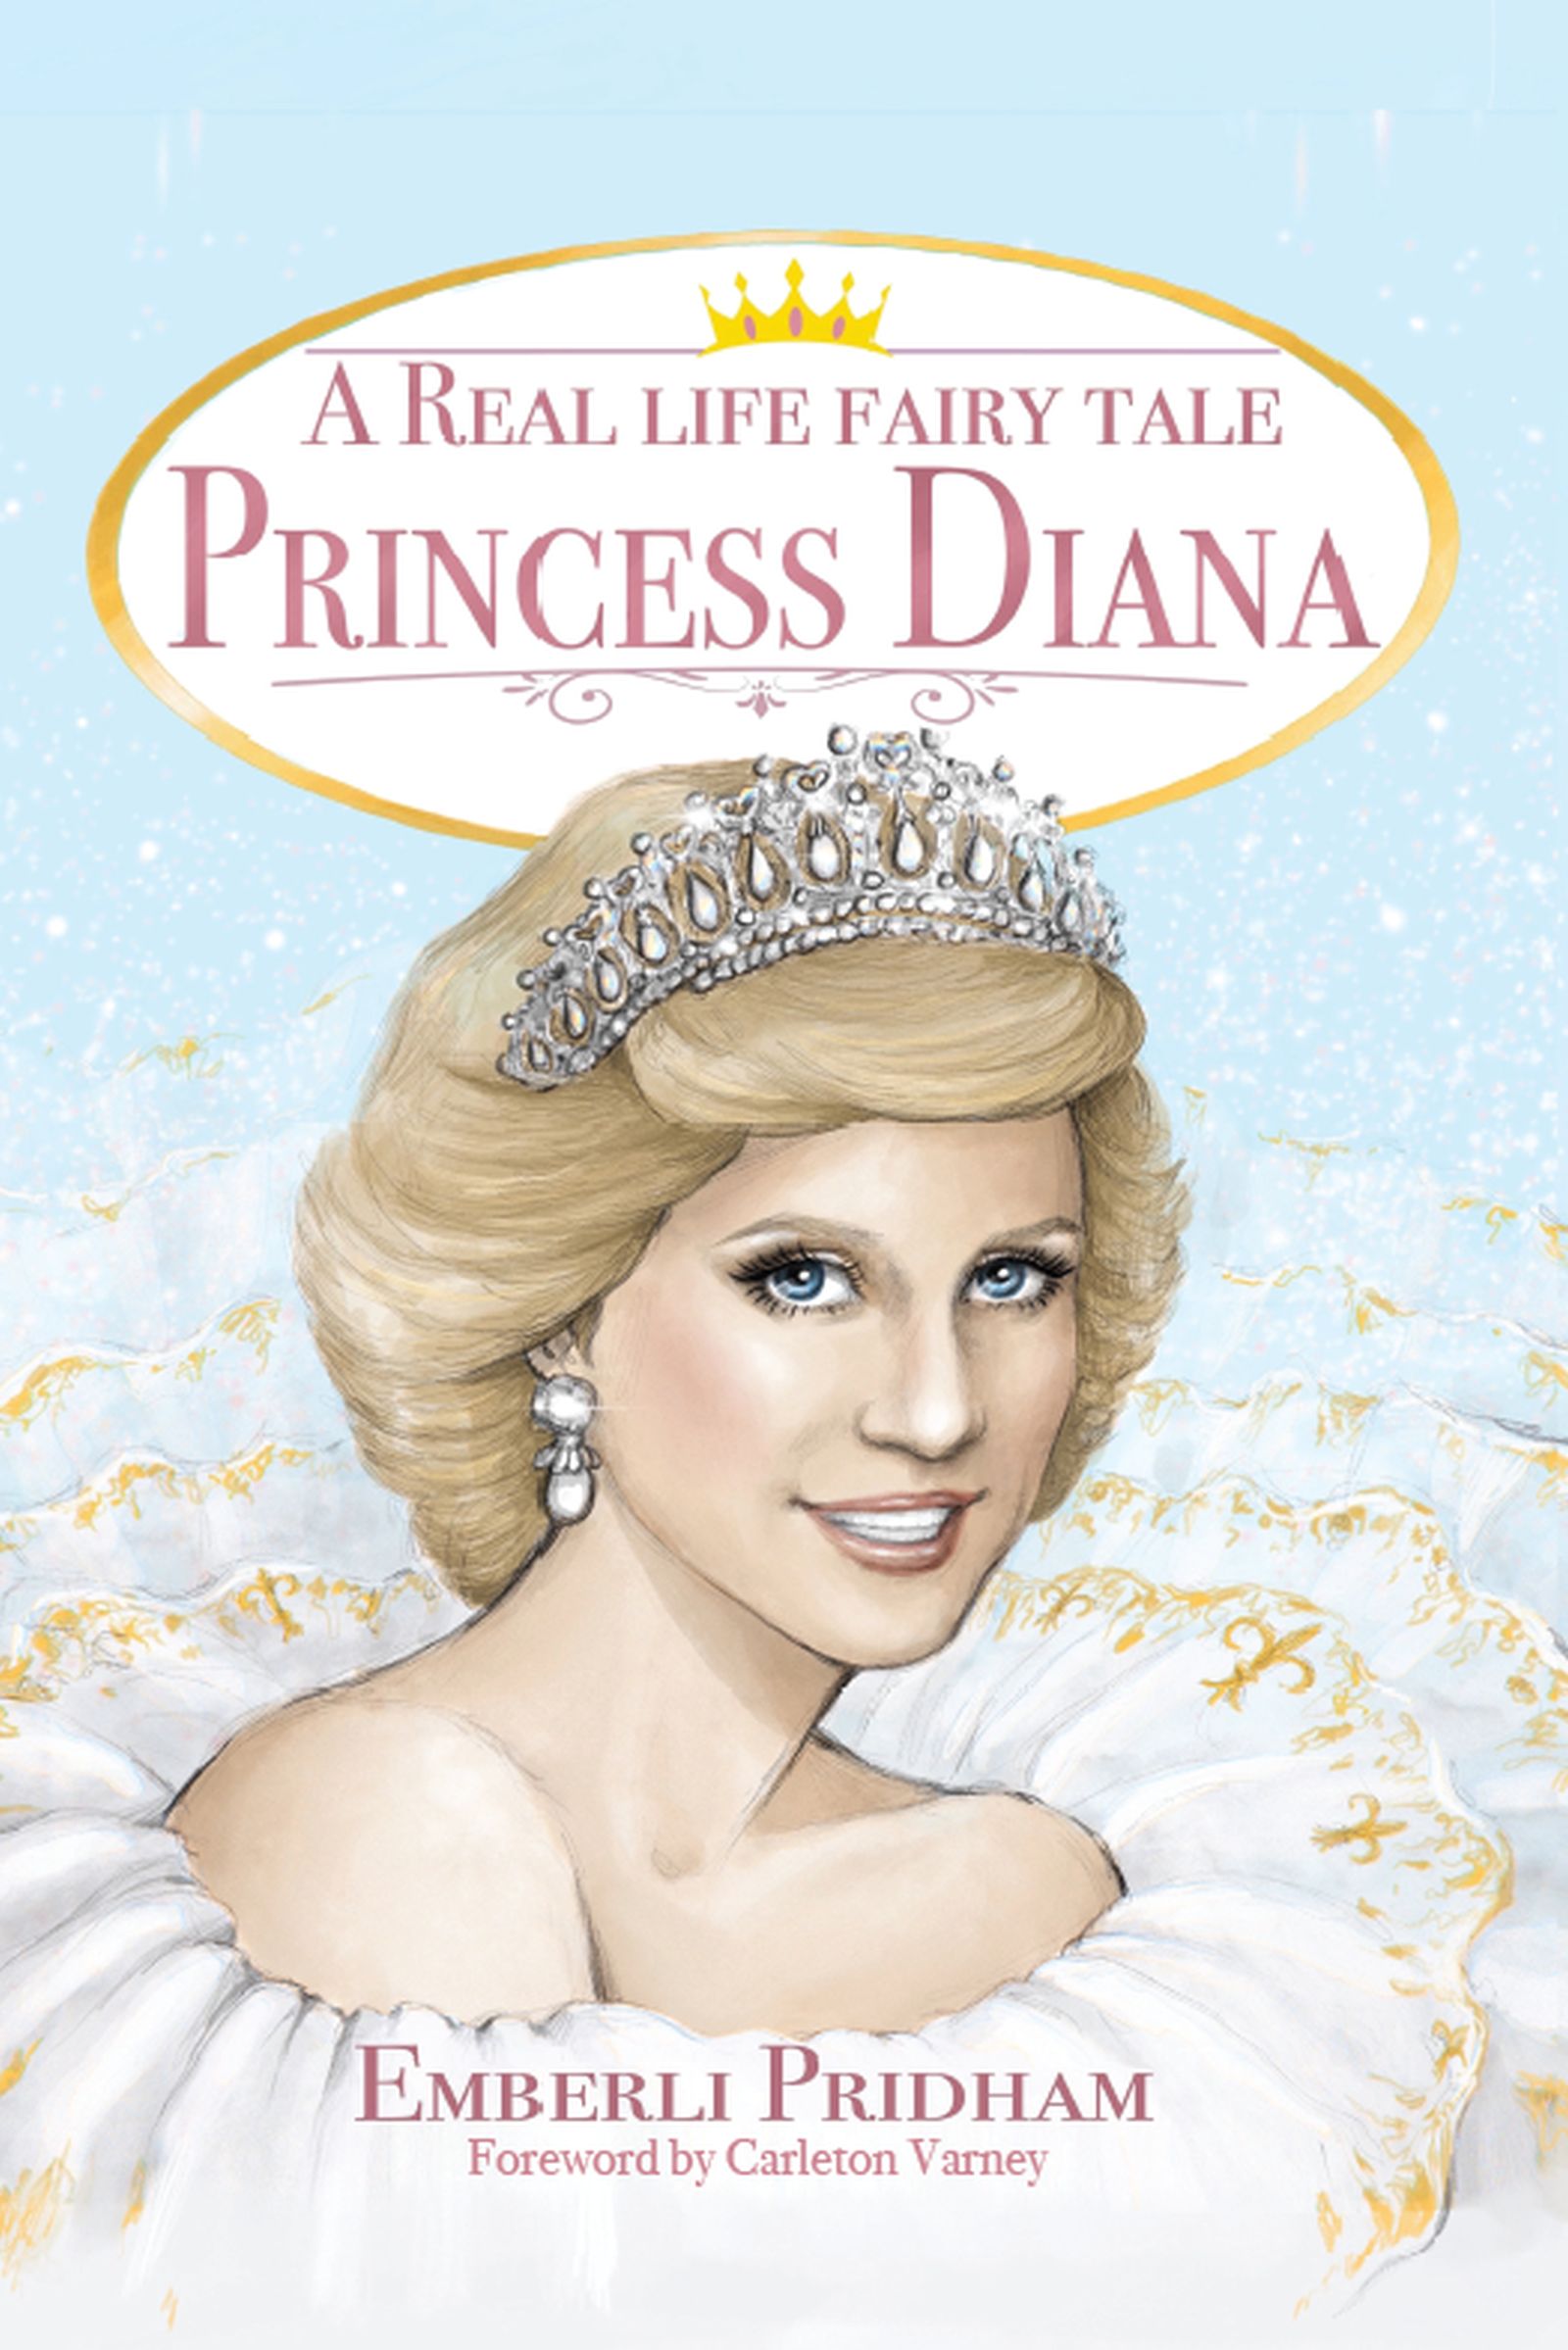 A Real Life Fairy Tale: Princess Diana by Emberli Pridham